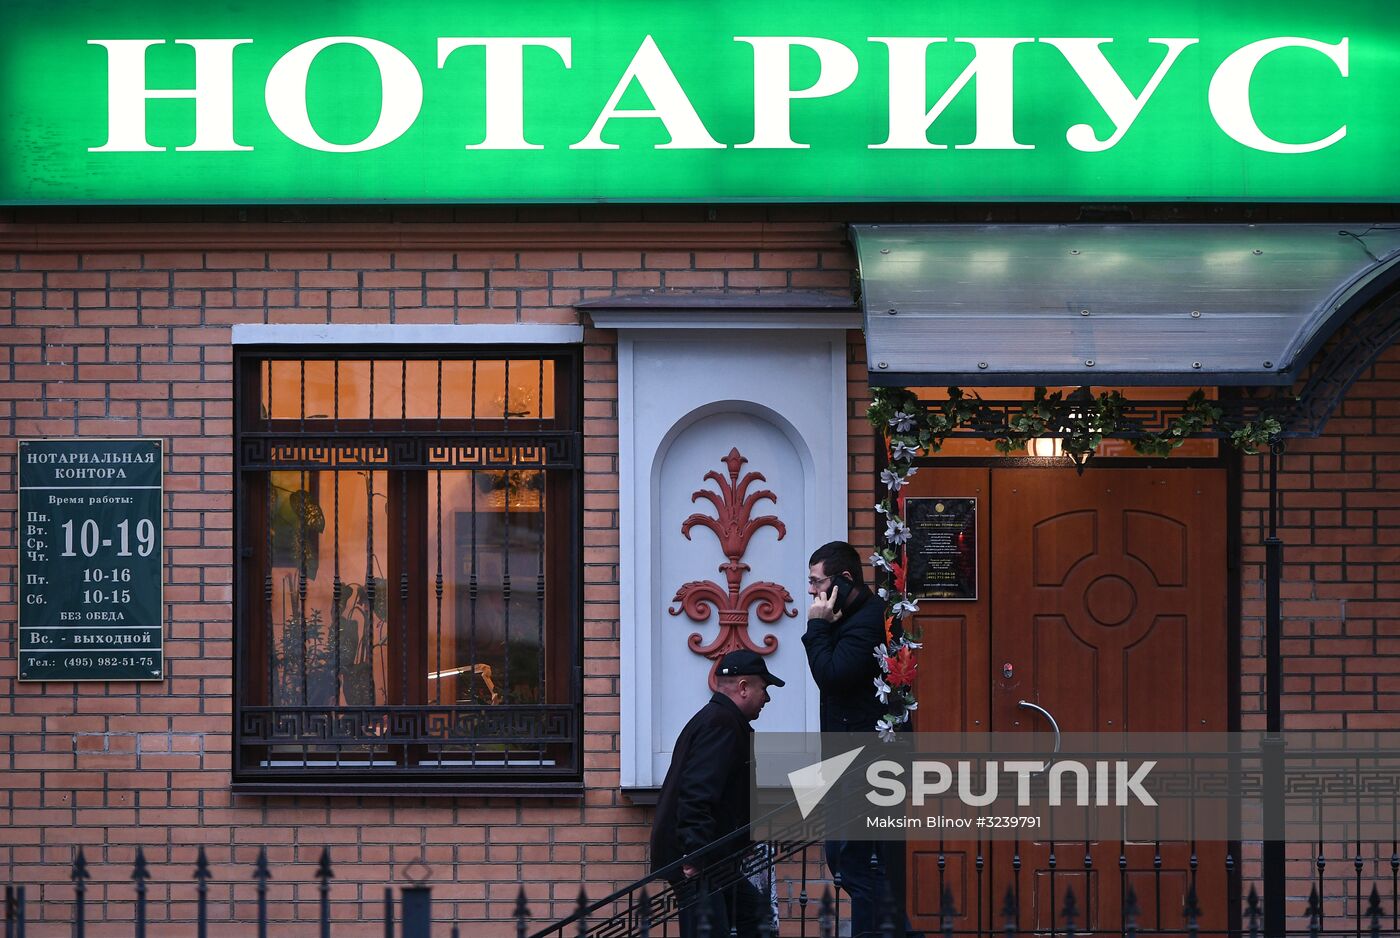 Notary public in Moscow